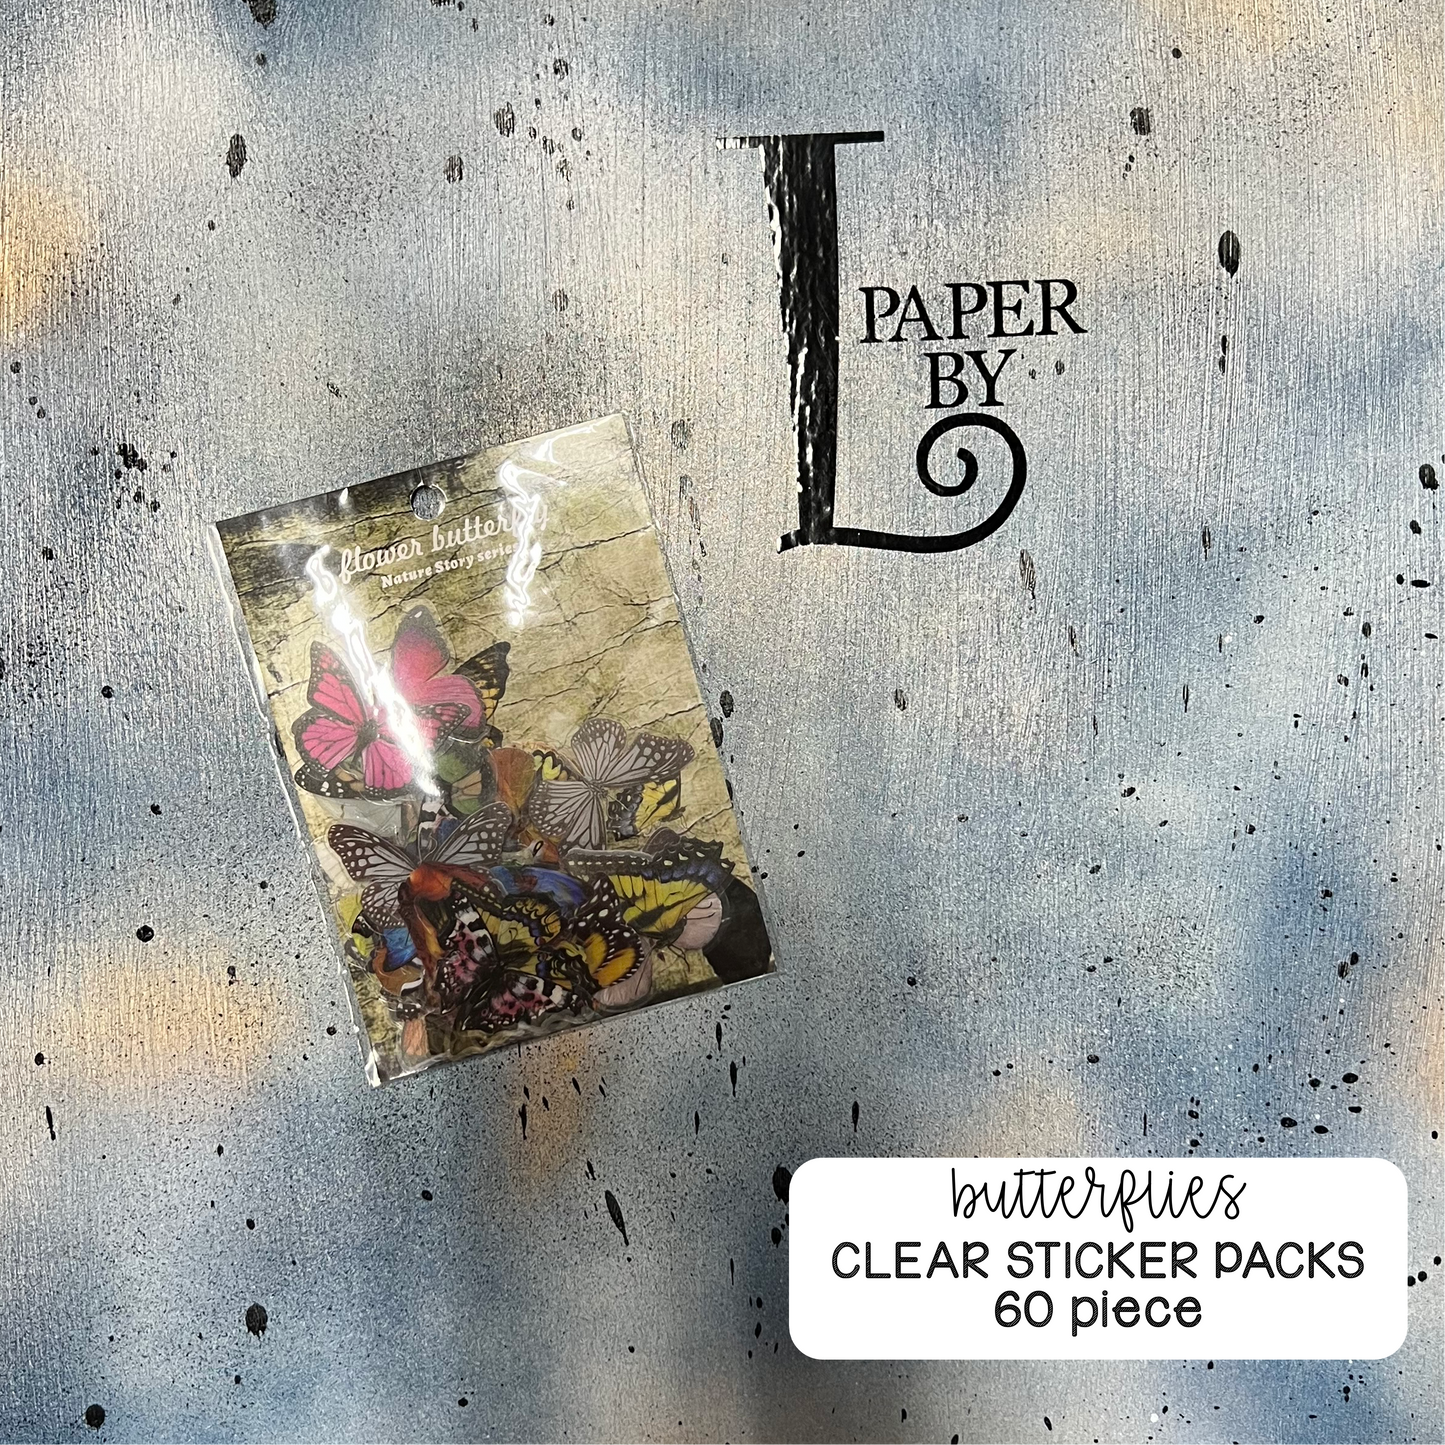 Clear Sticker Packs - Paper by L